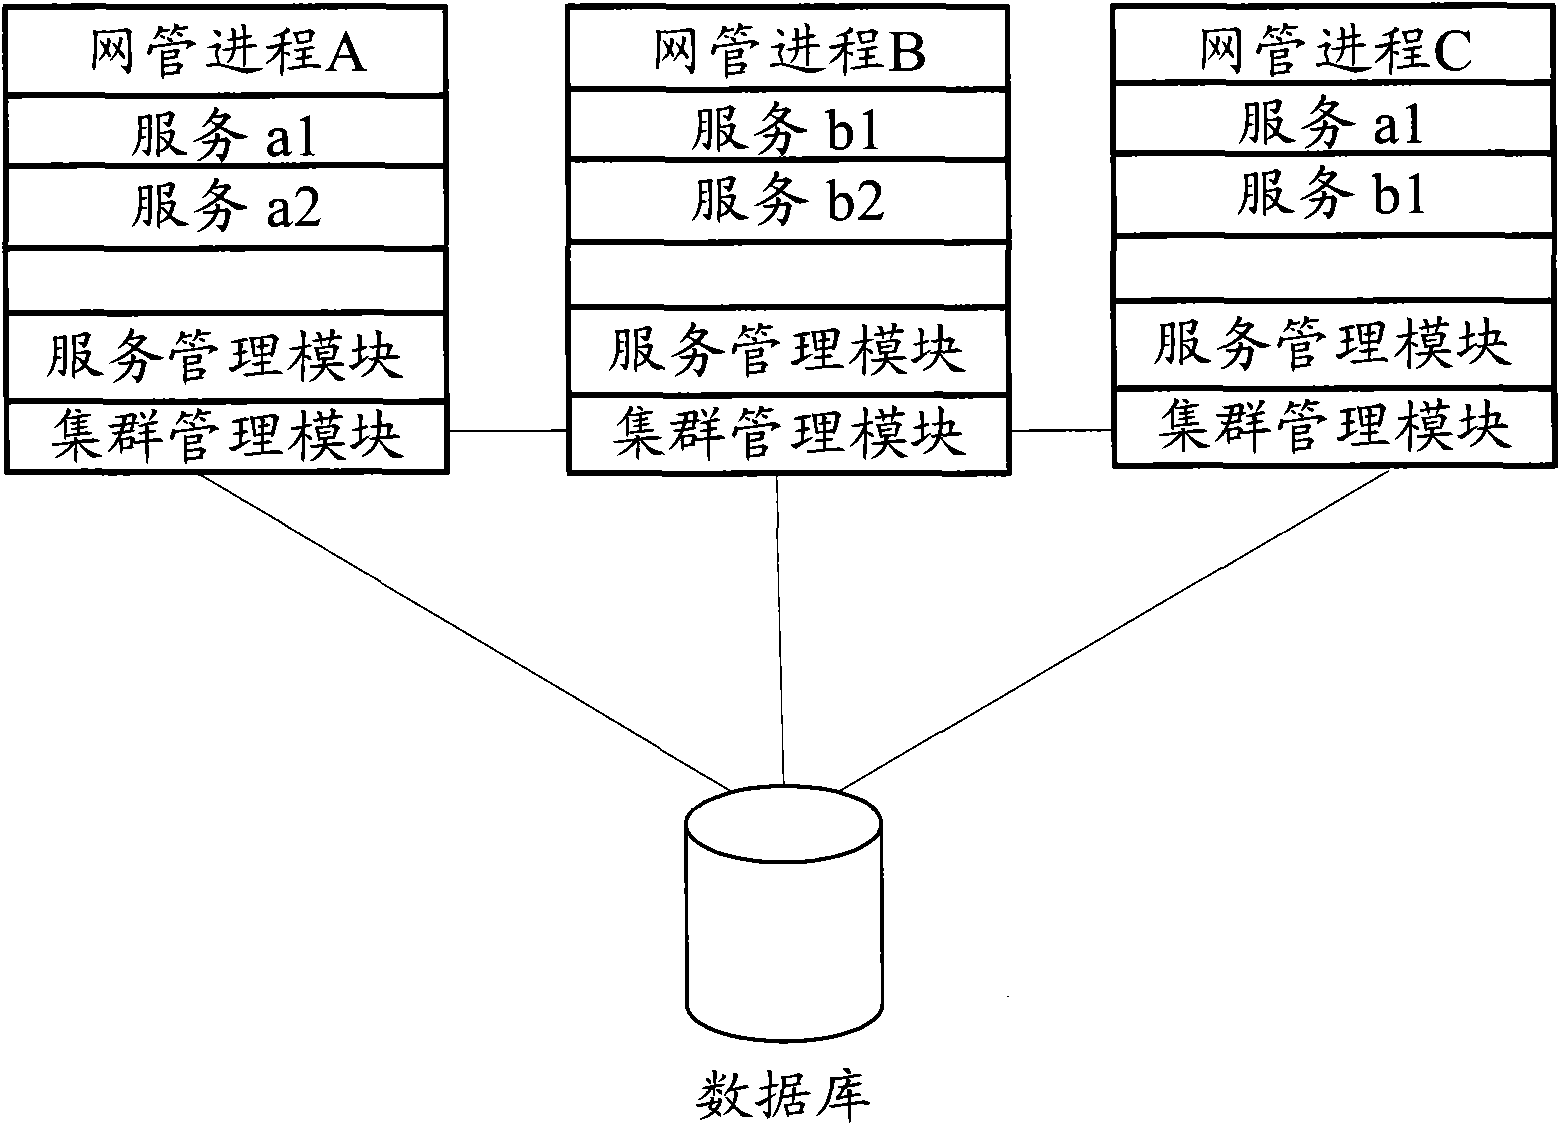 Cluster management system and method